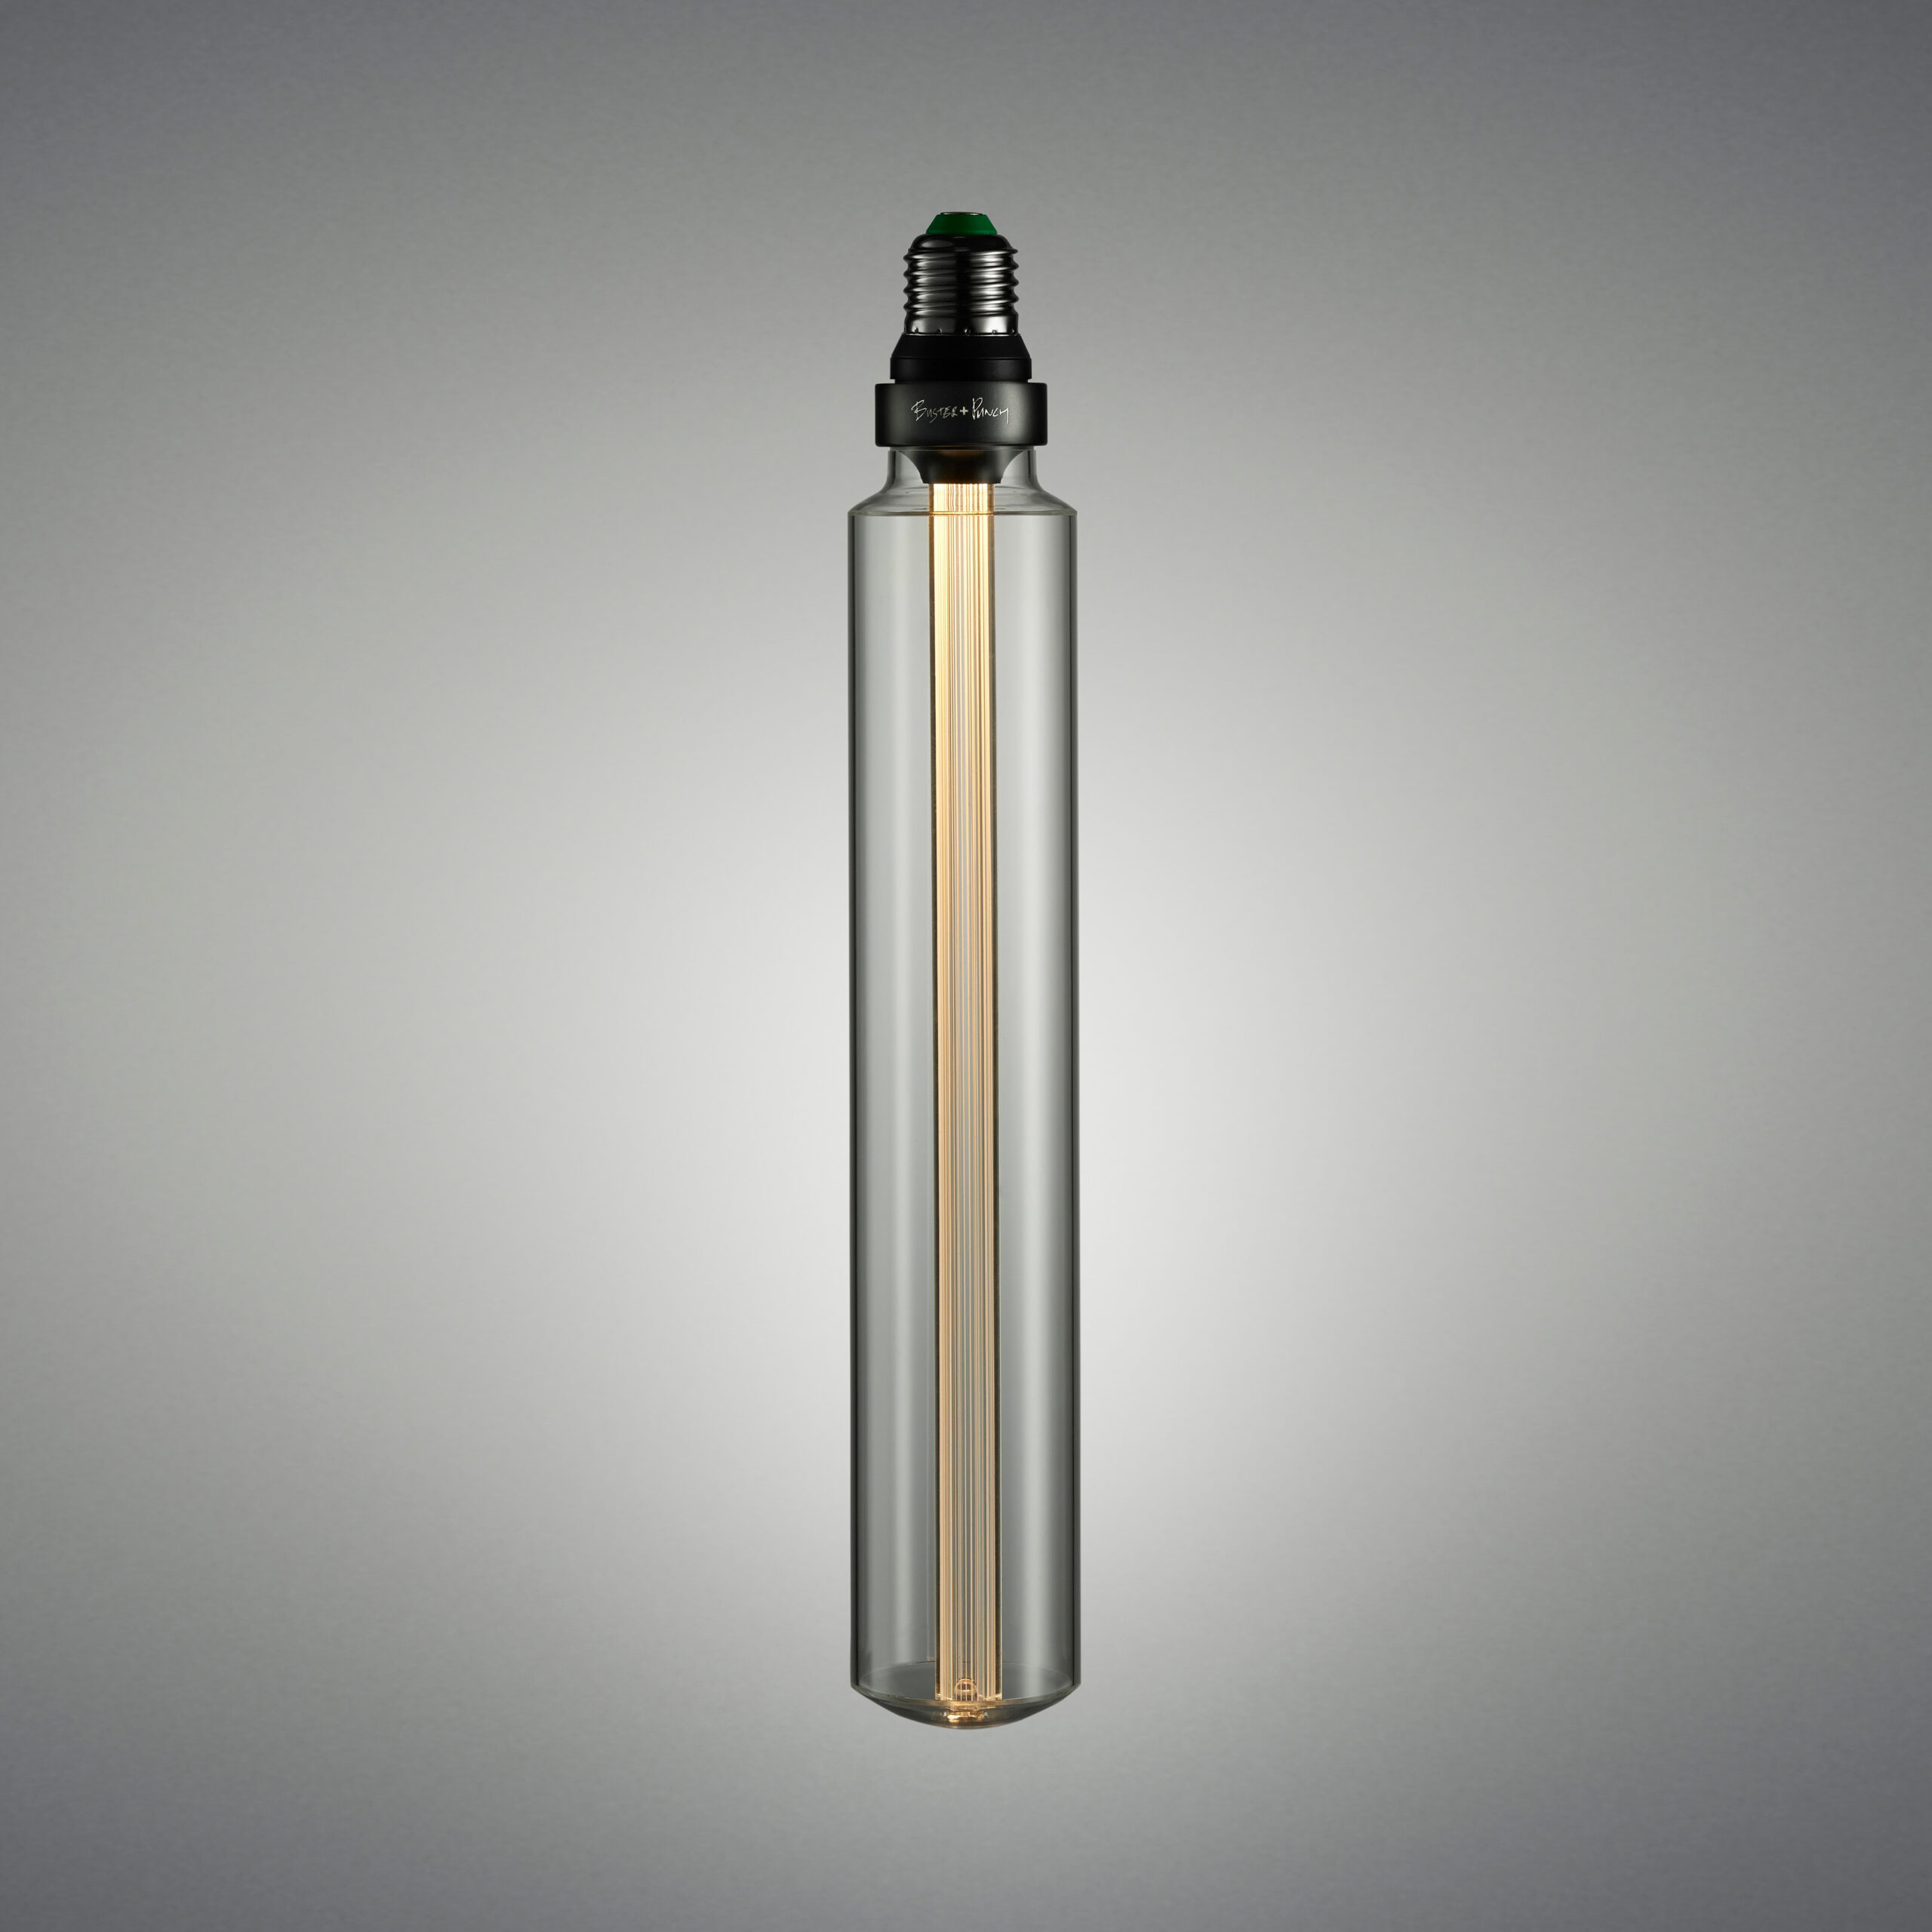 BUSTER BULB / TUBE / DIMMABLE